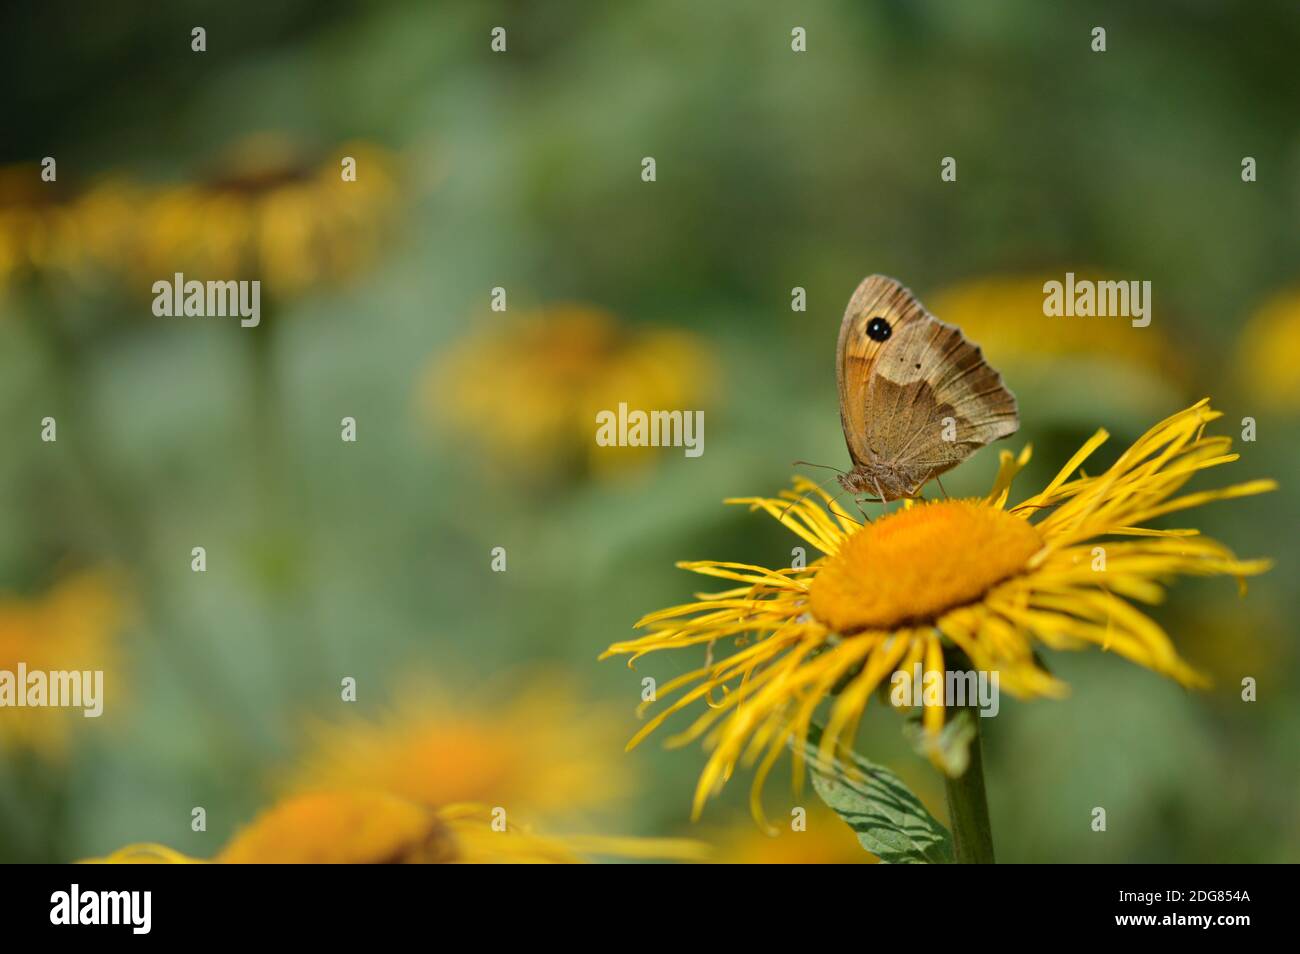 Large heath butterfly on a yellow flower, brown and orange butterfly with a black dot, close up, macro, closed wing, side view. Stock Photo